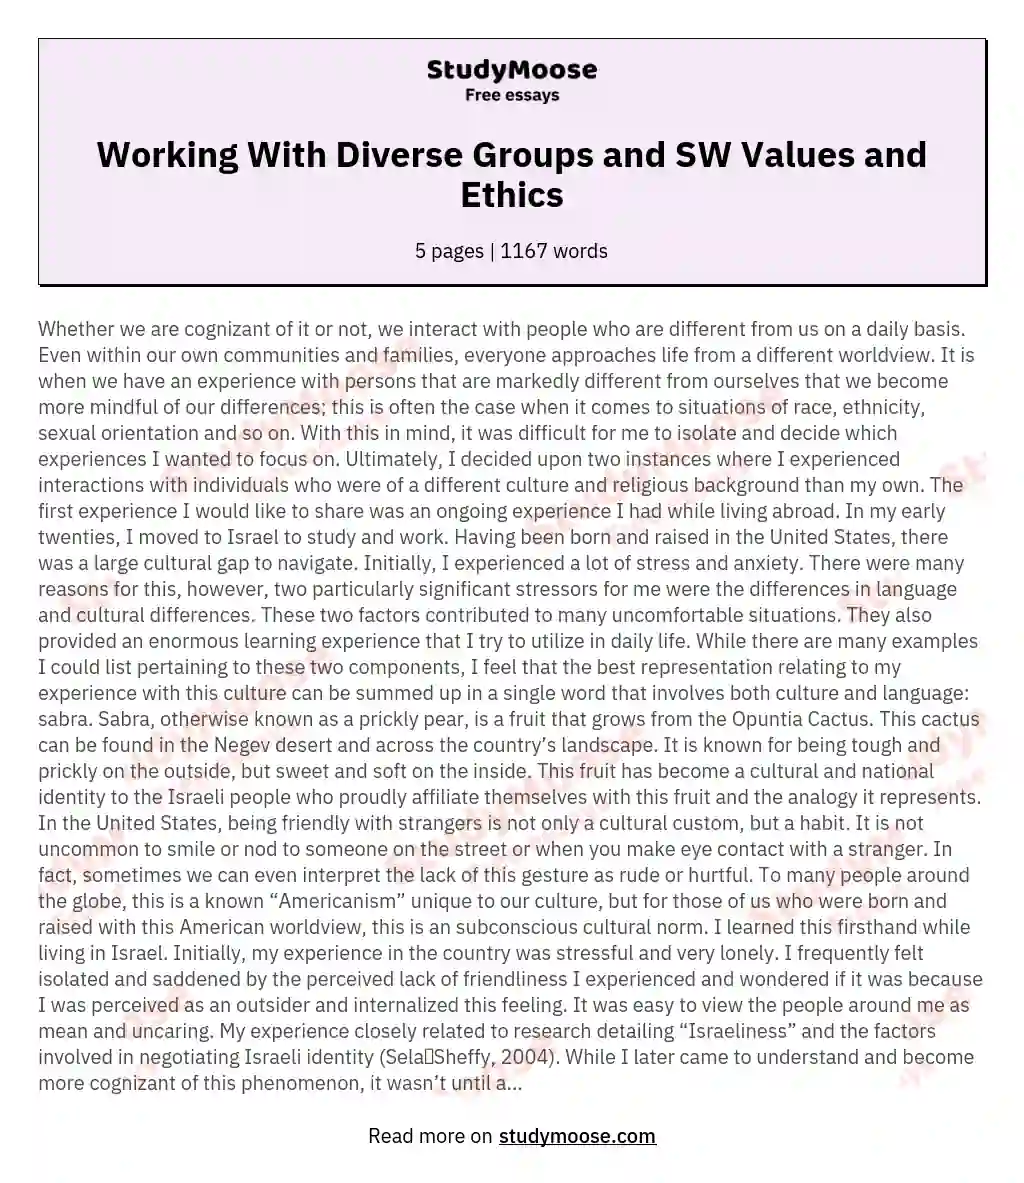 Working With Diverse Groups and SW Values and Ethics essay